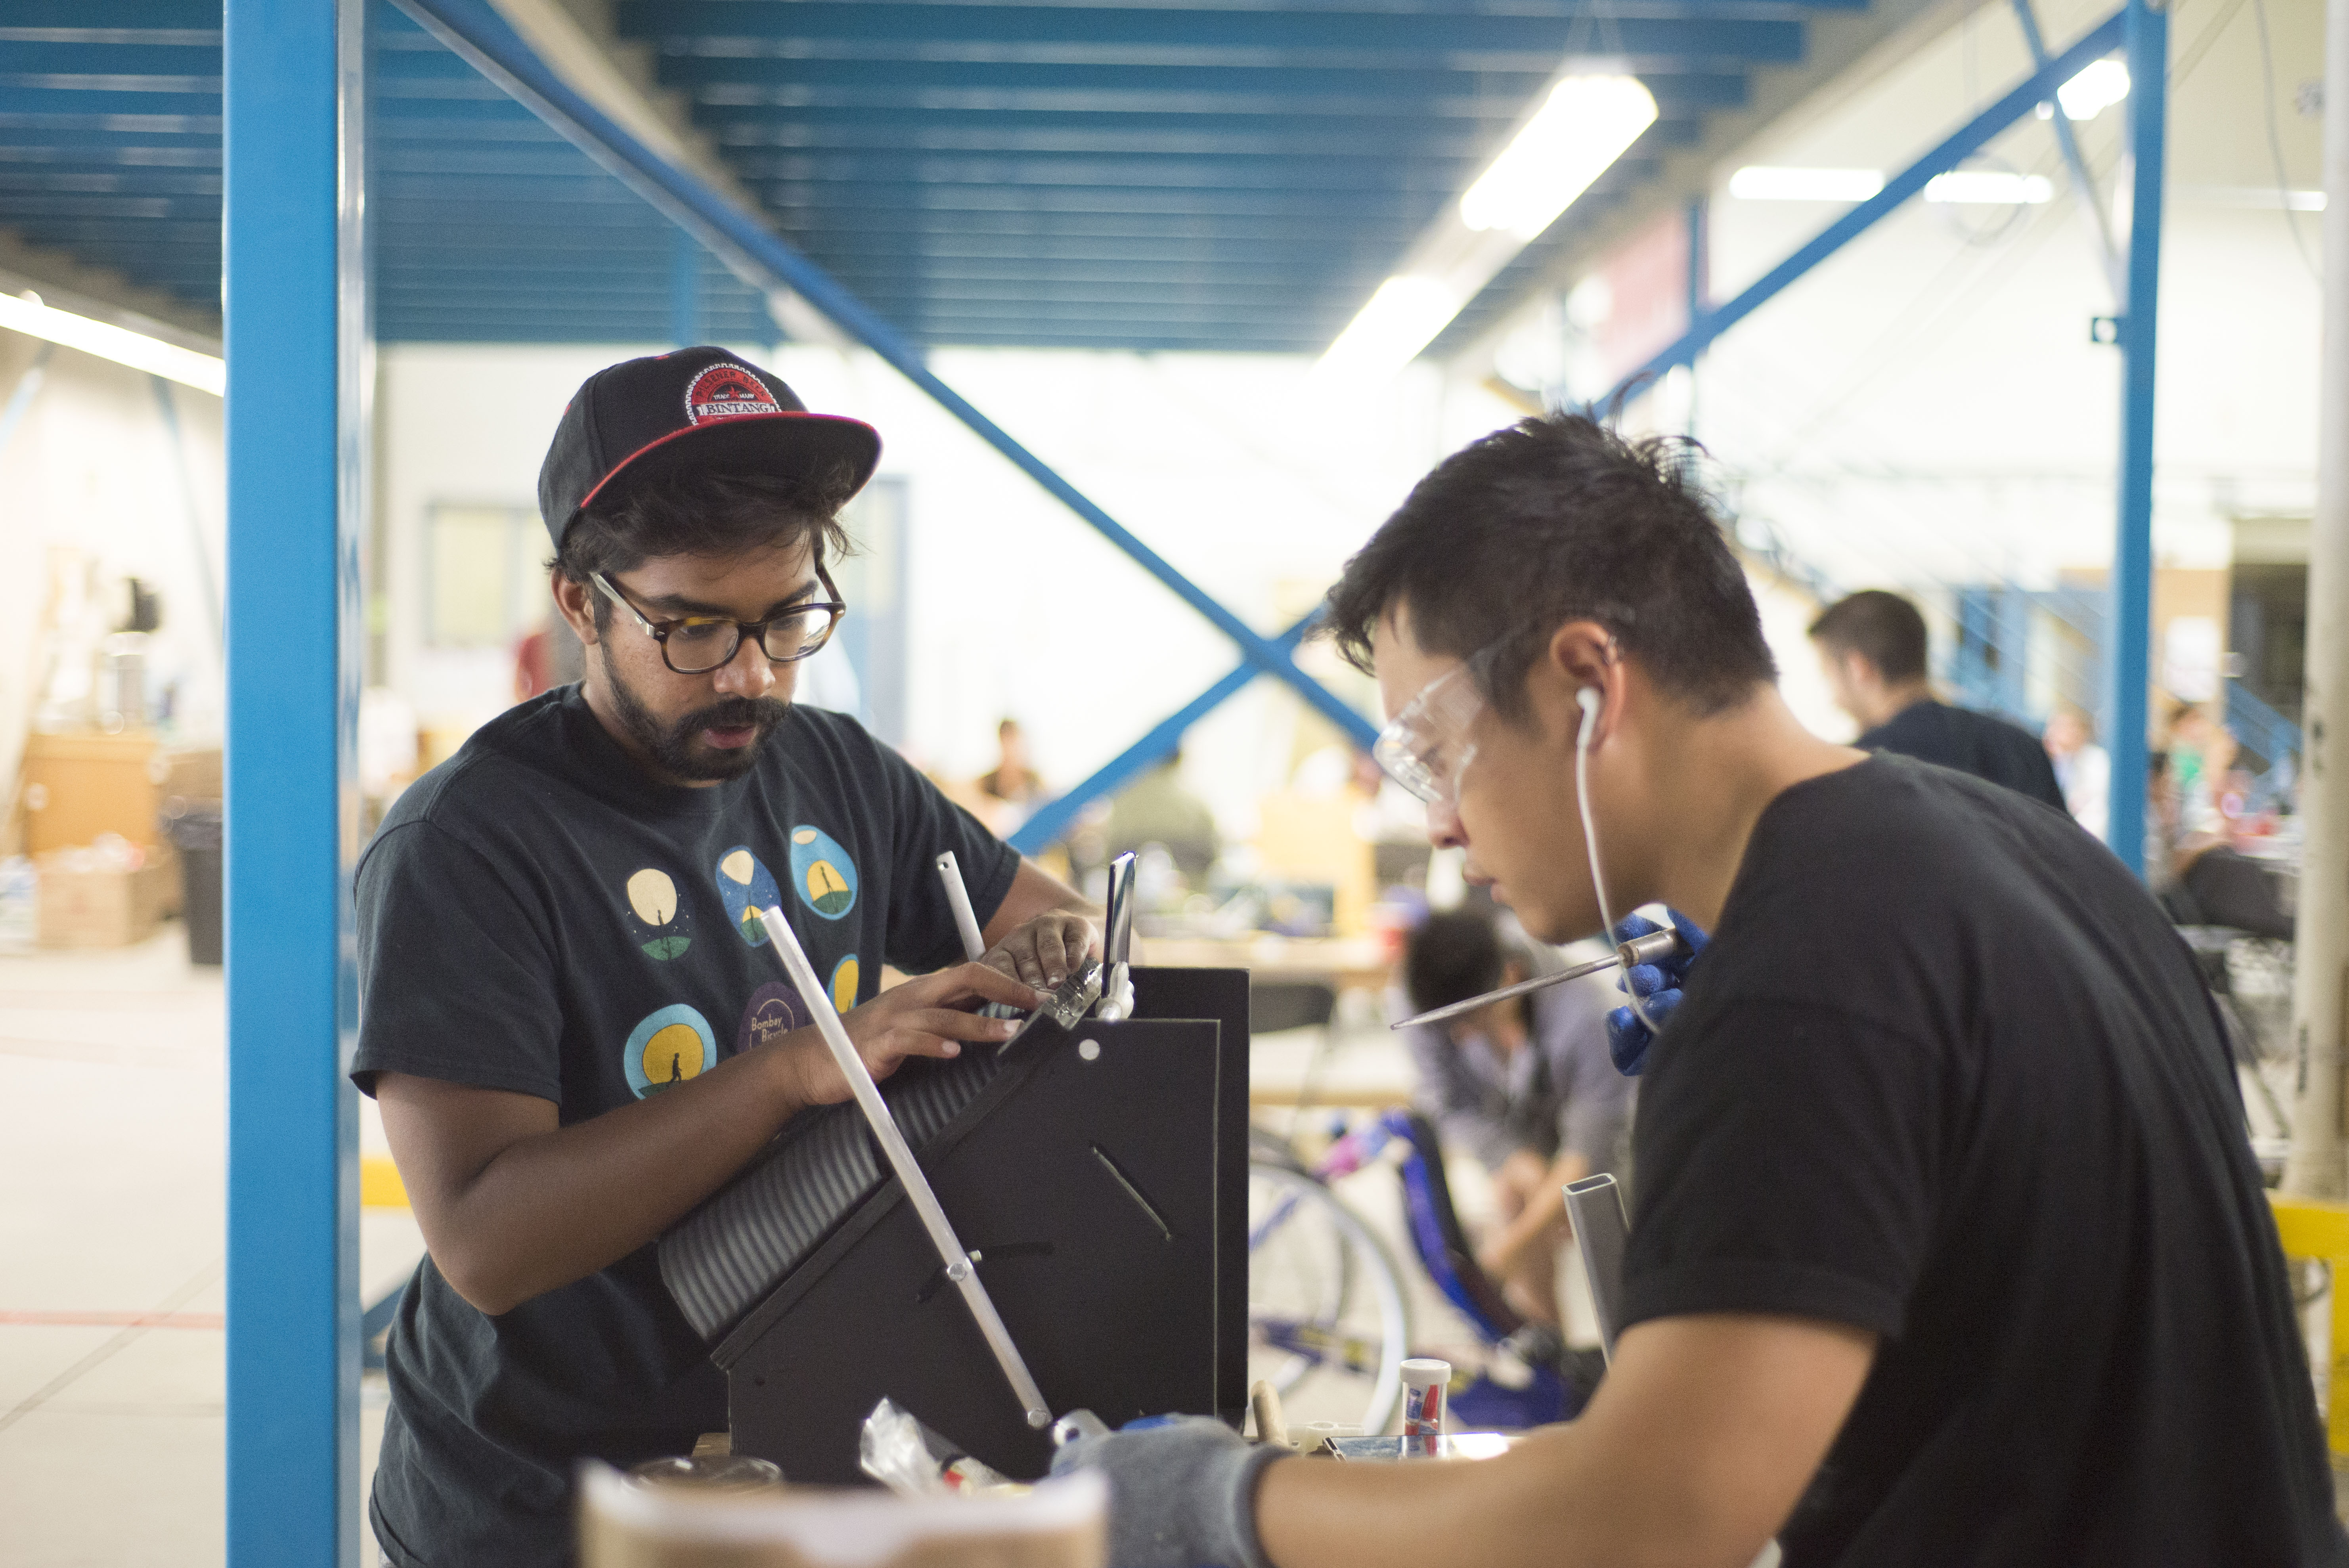 Disability and engineering communities pair up for assistive technology hackathon